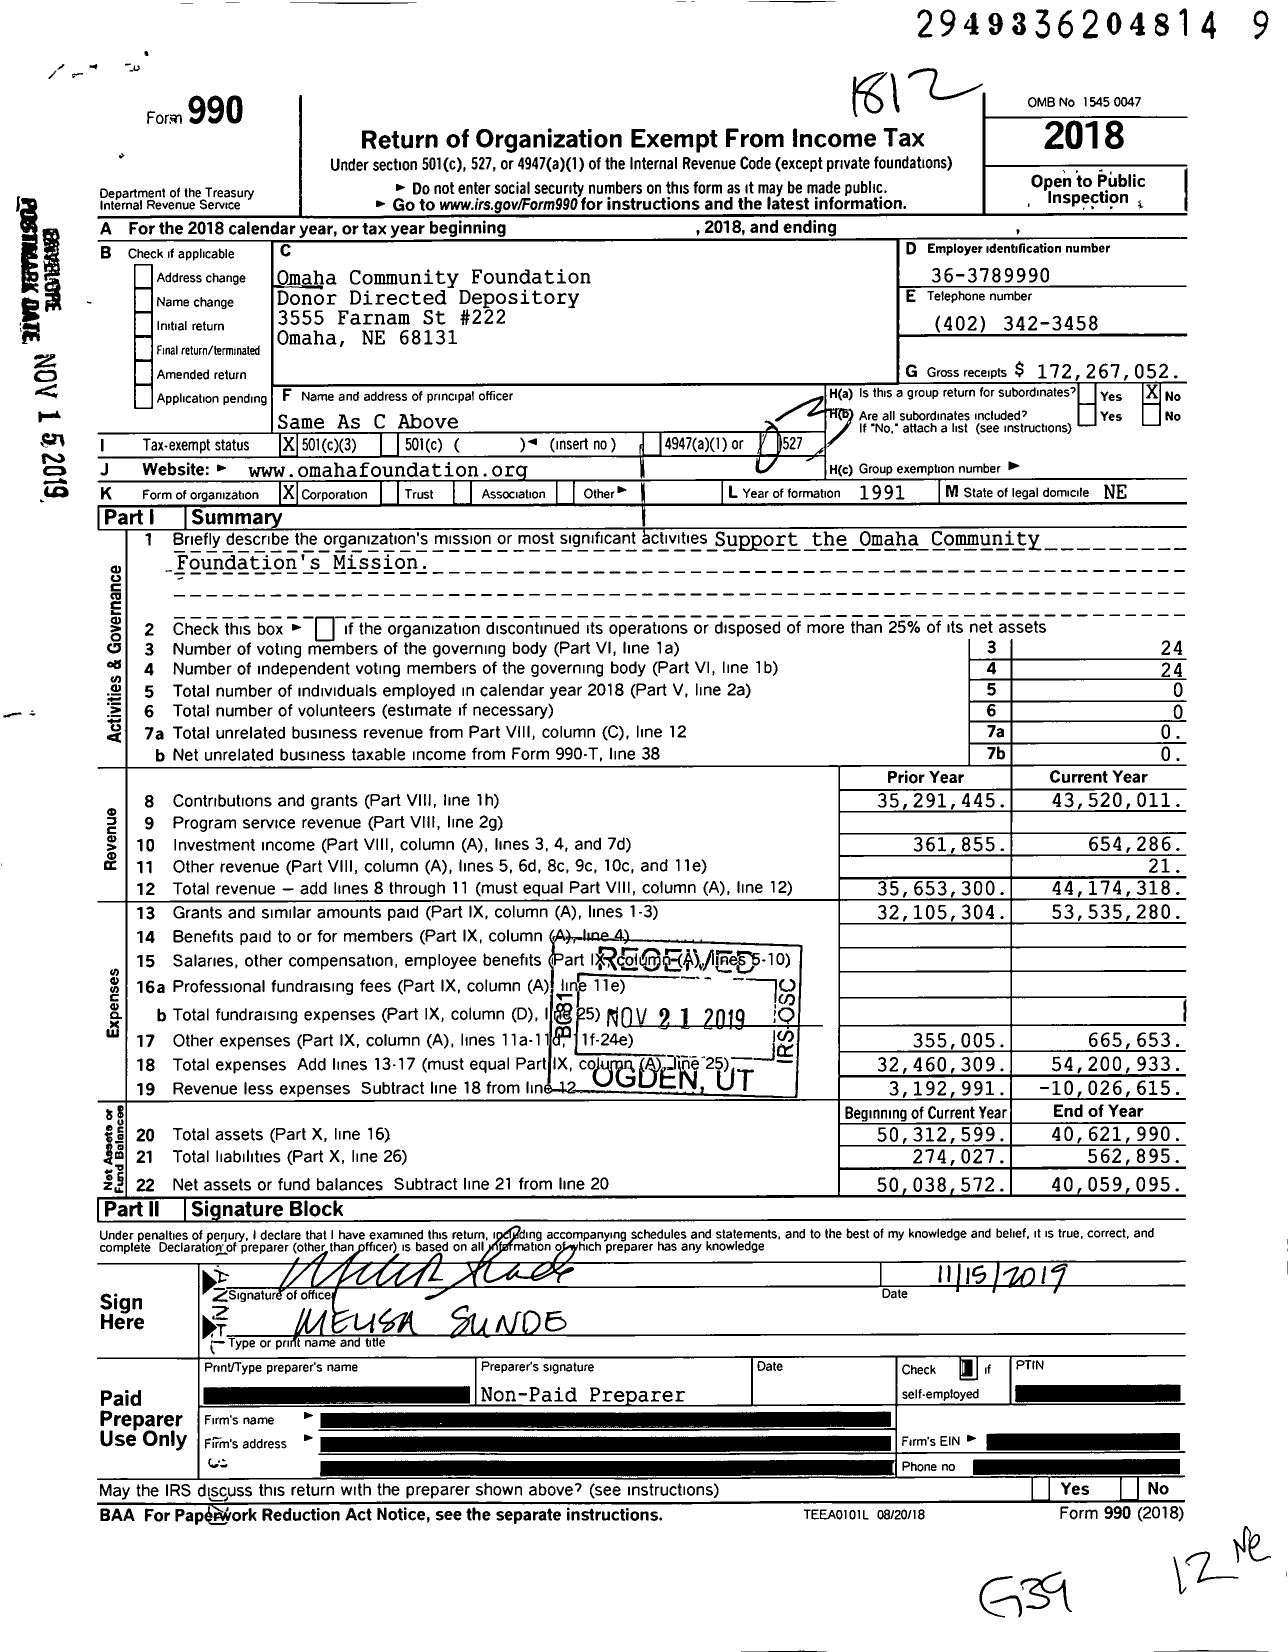 Image of first page of 2018 Form 990 for Omaha Community Foundation Donor Directed Depository